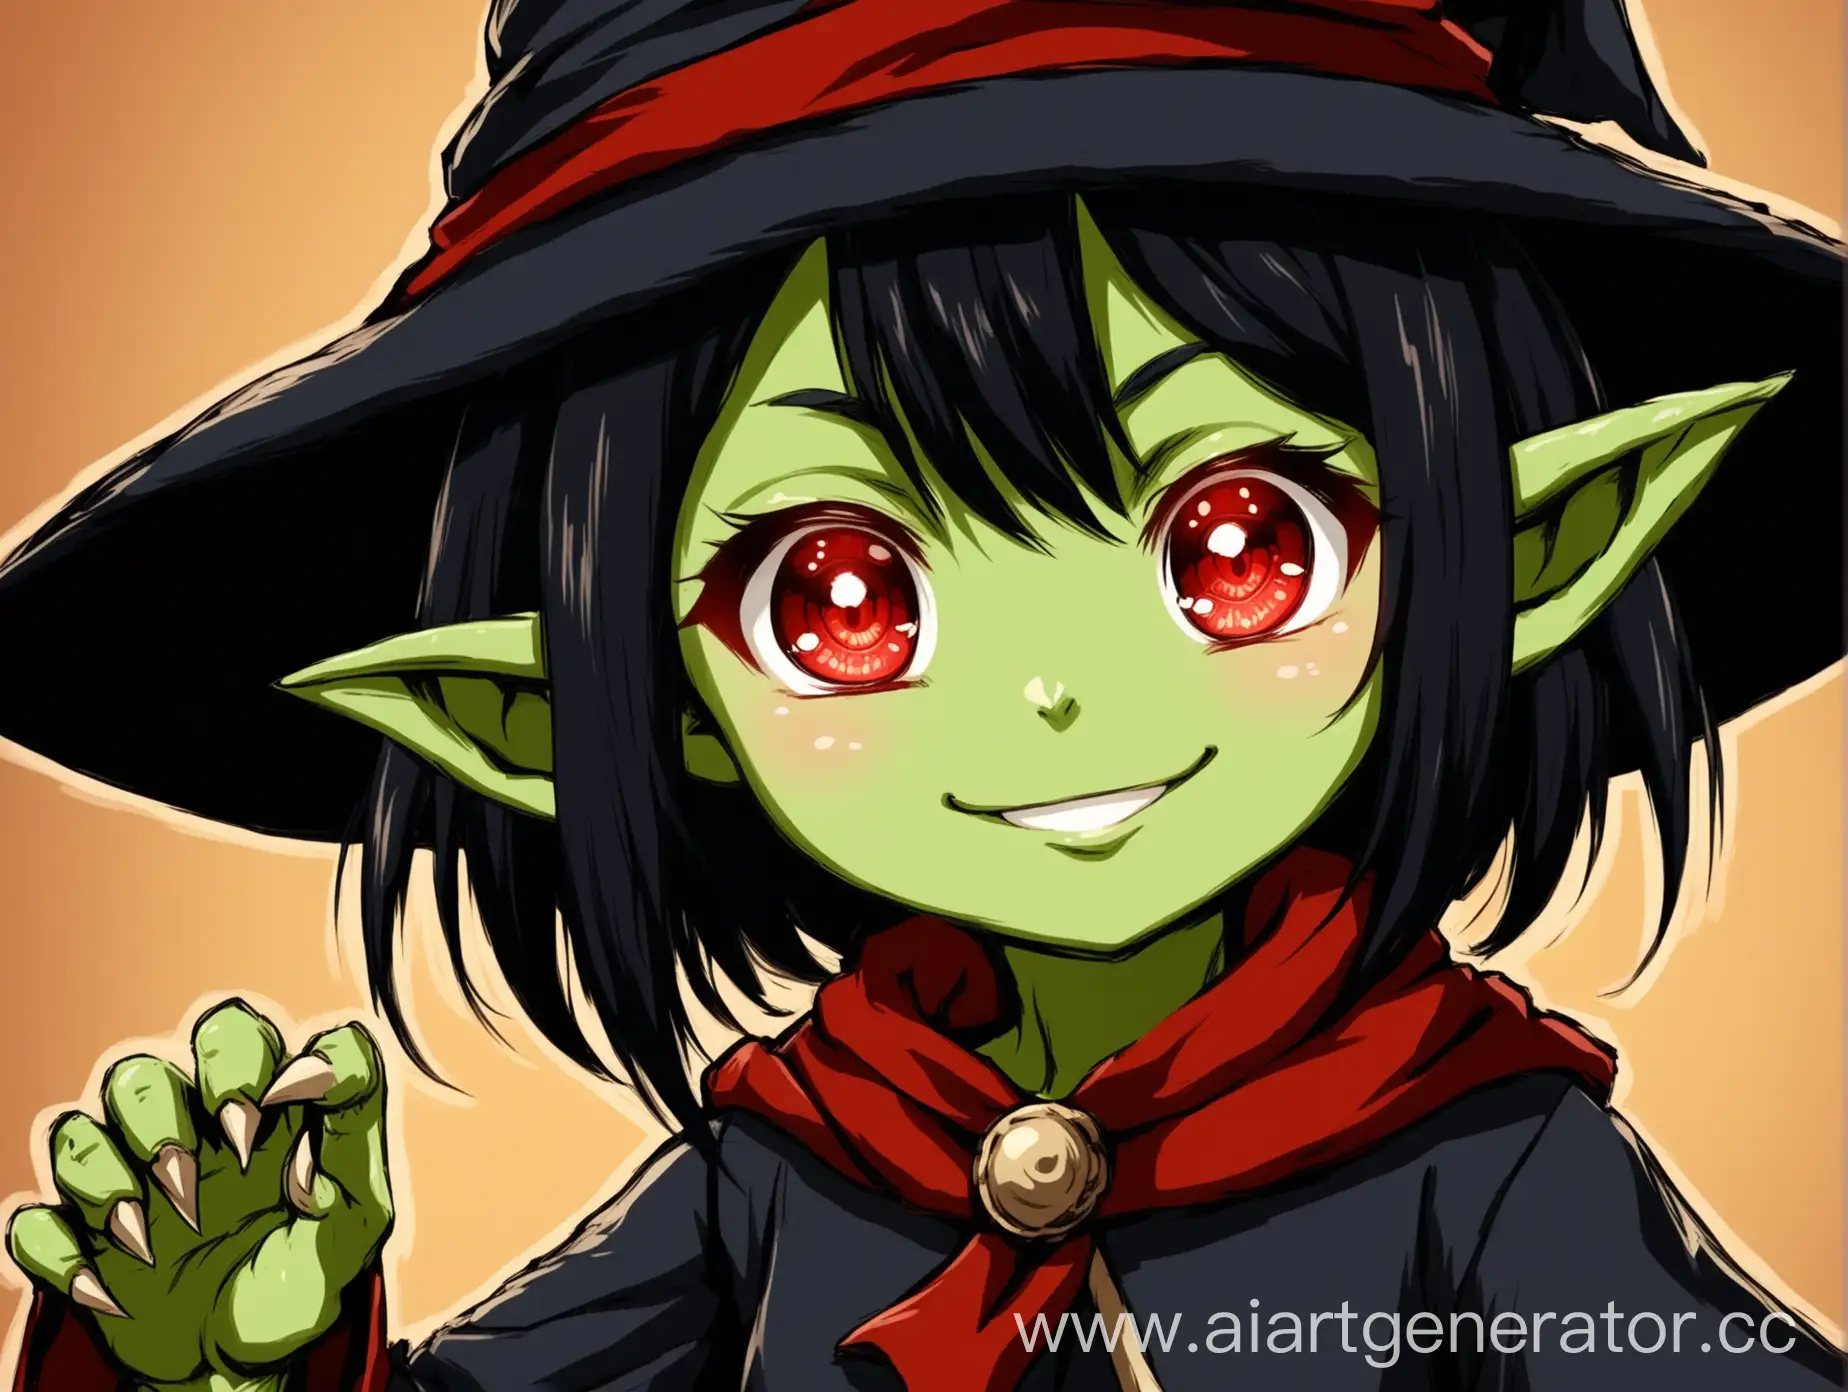 Adorable-Anime-Female-Goblin-Mage-with-Red-and-Black-Attire